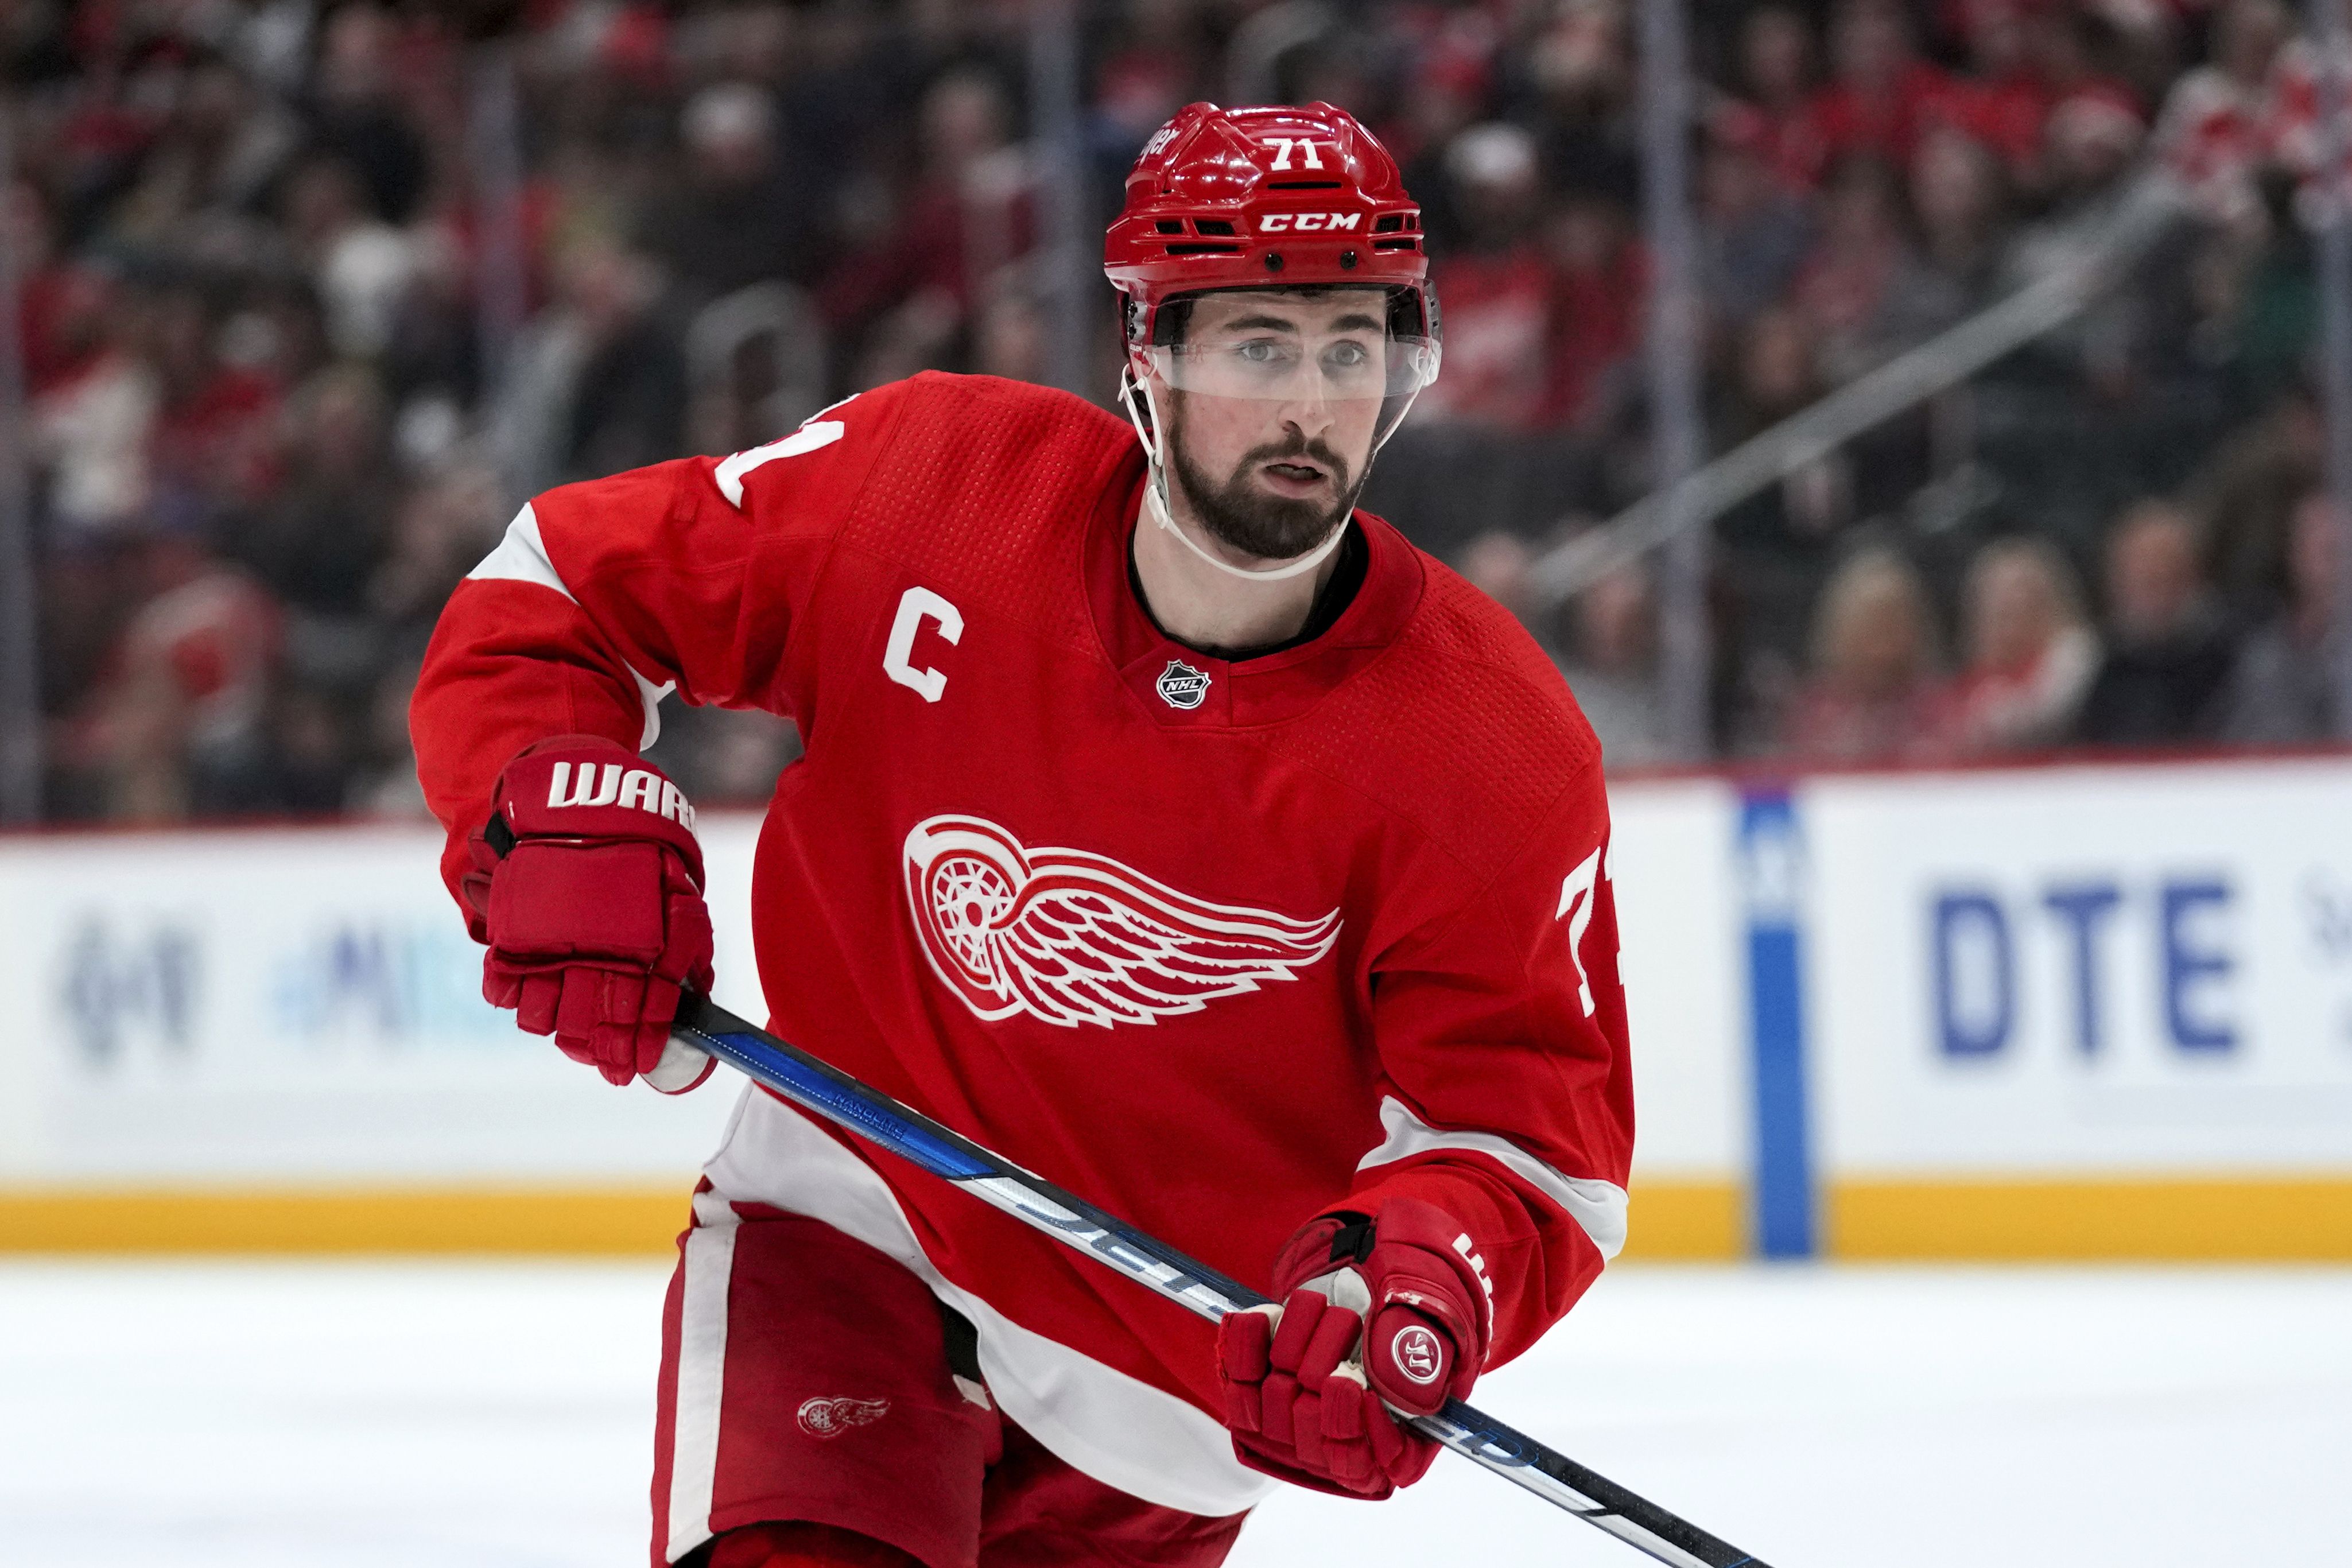 Dylan Larkin's choice: Another year at Michigan or Red Wings contract?